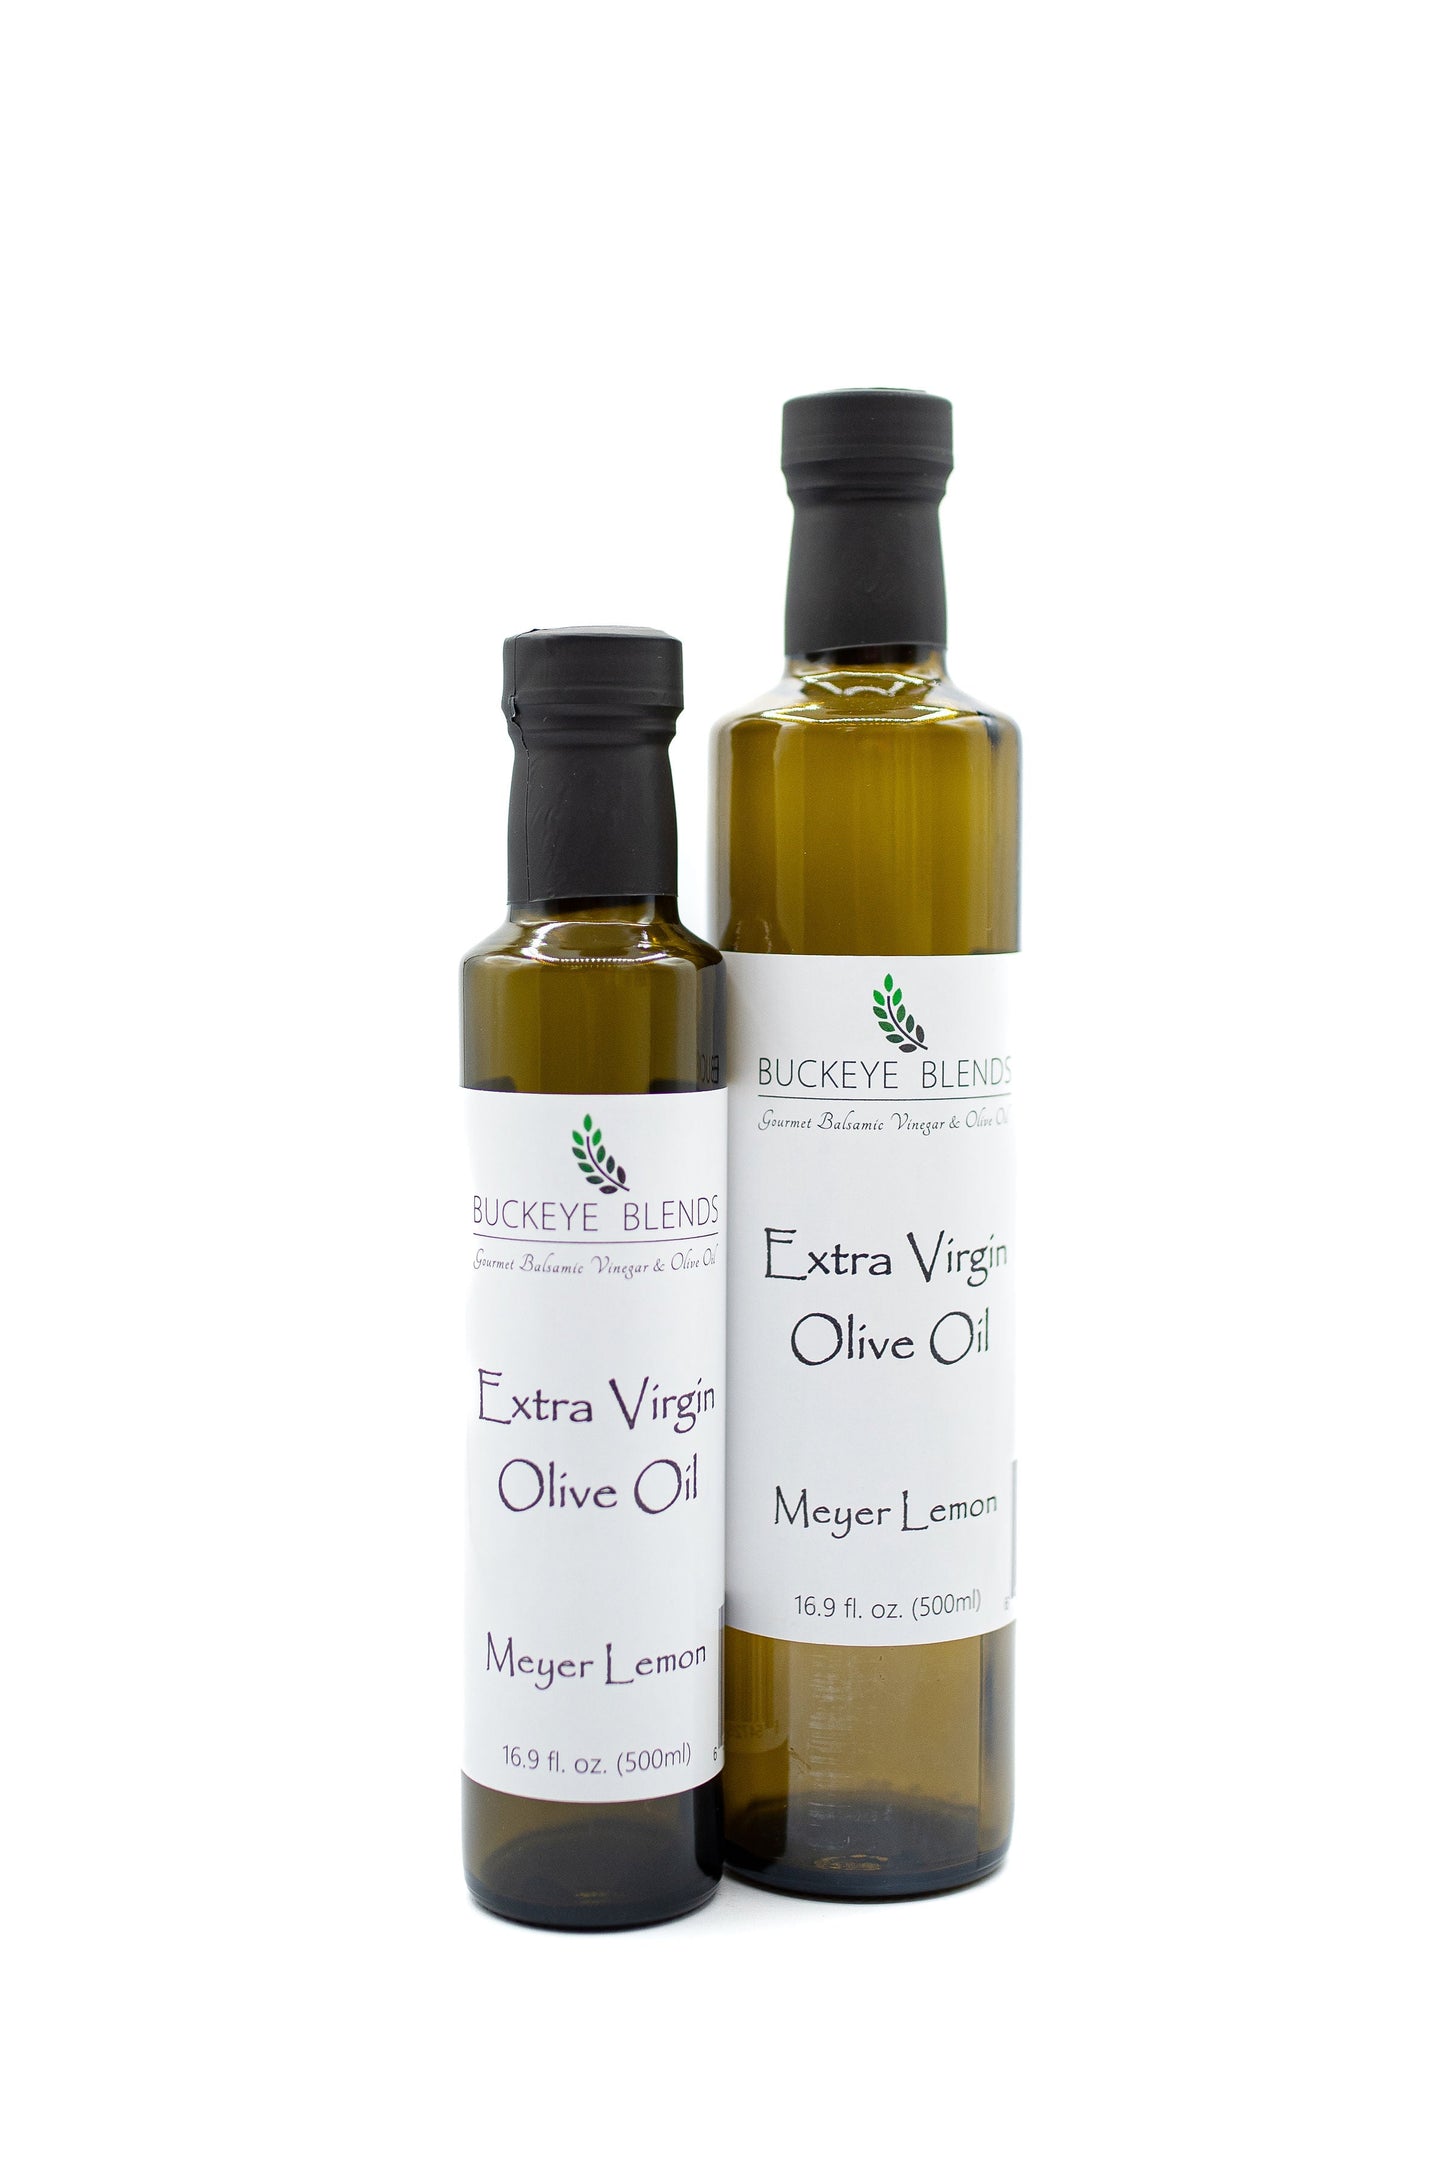 Buckeye Blends Meyer Lemon Olive Oil is a sweet and full of citrus flavor lemon EVOO.  Our lemon olive oil is created by adding all natural lemon flavor to unfiltered extra virgin olive oil.  Perfect for salad, fish, chicken, and pasta!  Buckeye Blends Meyer Lemon Olive Oil will quickly become one of your favorites in the kitchen!